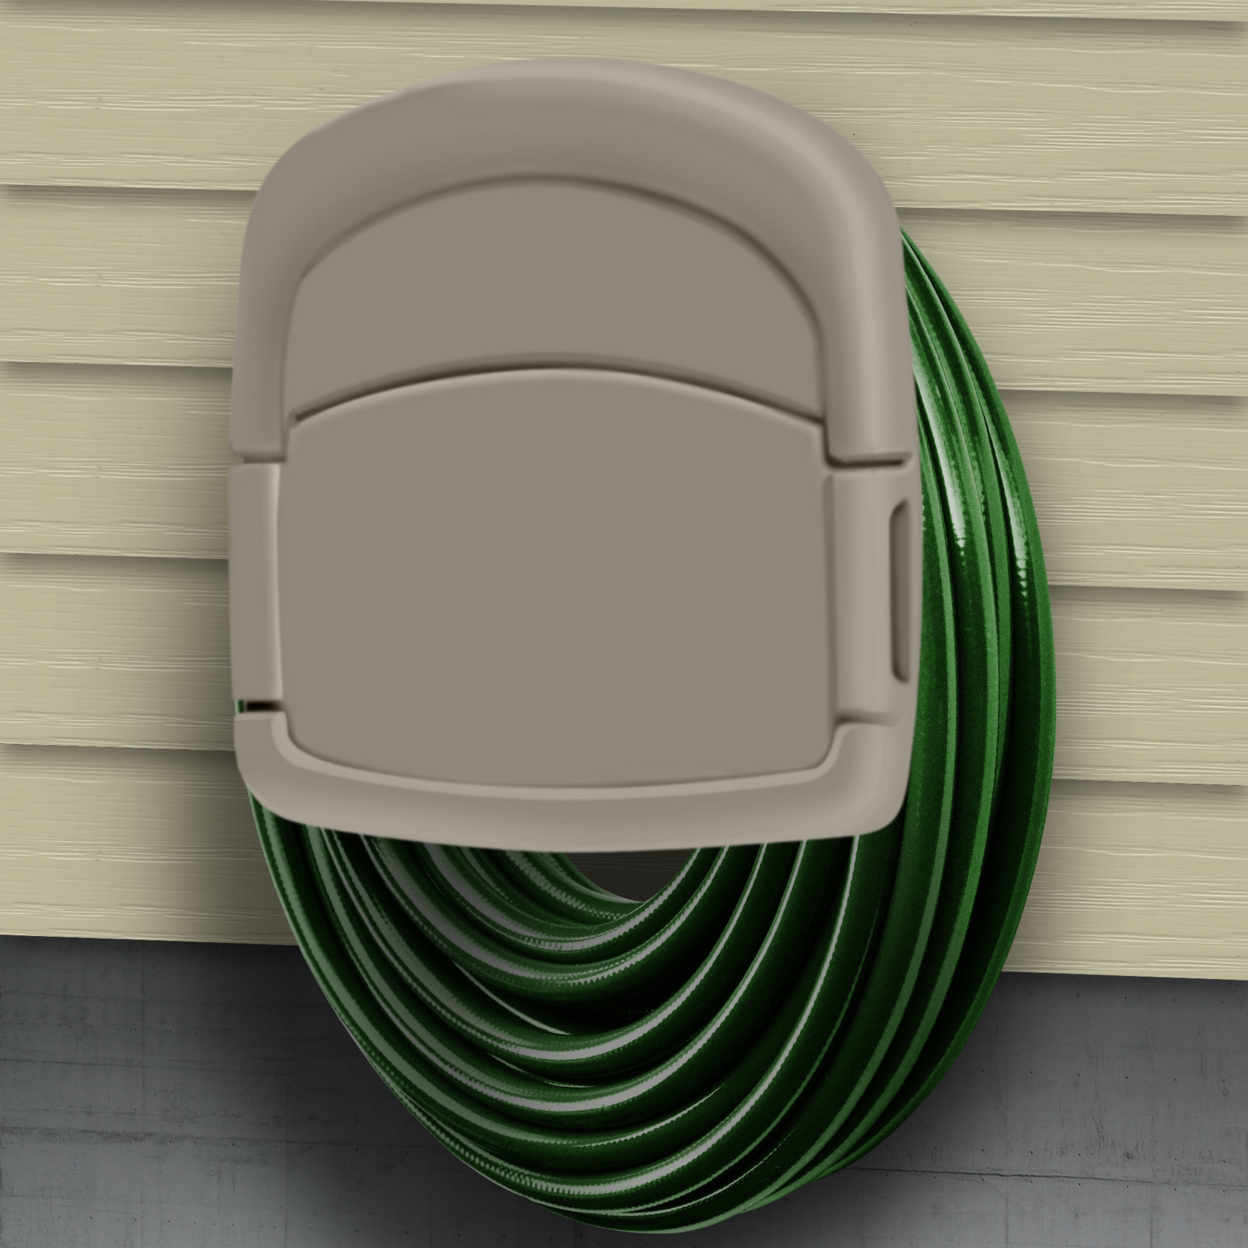 Wall Mounted Garden Hose Storage Caddy - 150-Foot Capacity For Standard 5/8 Outdoor